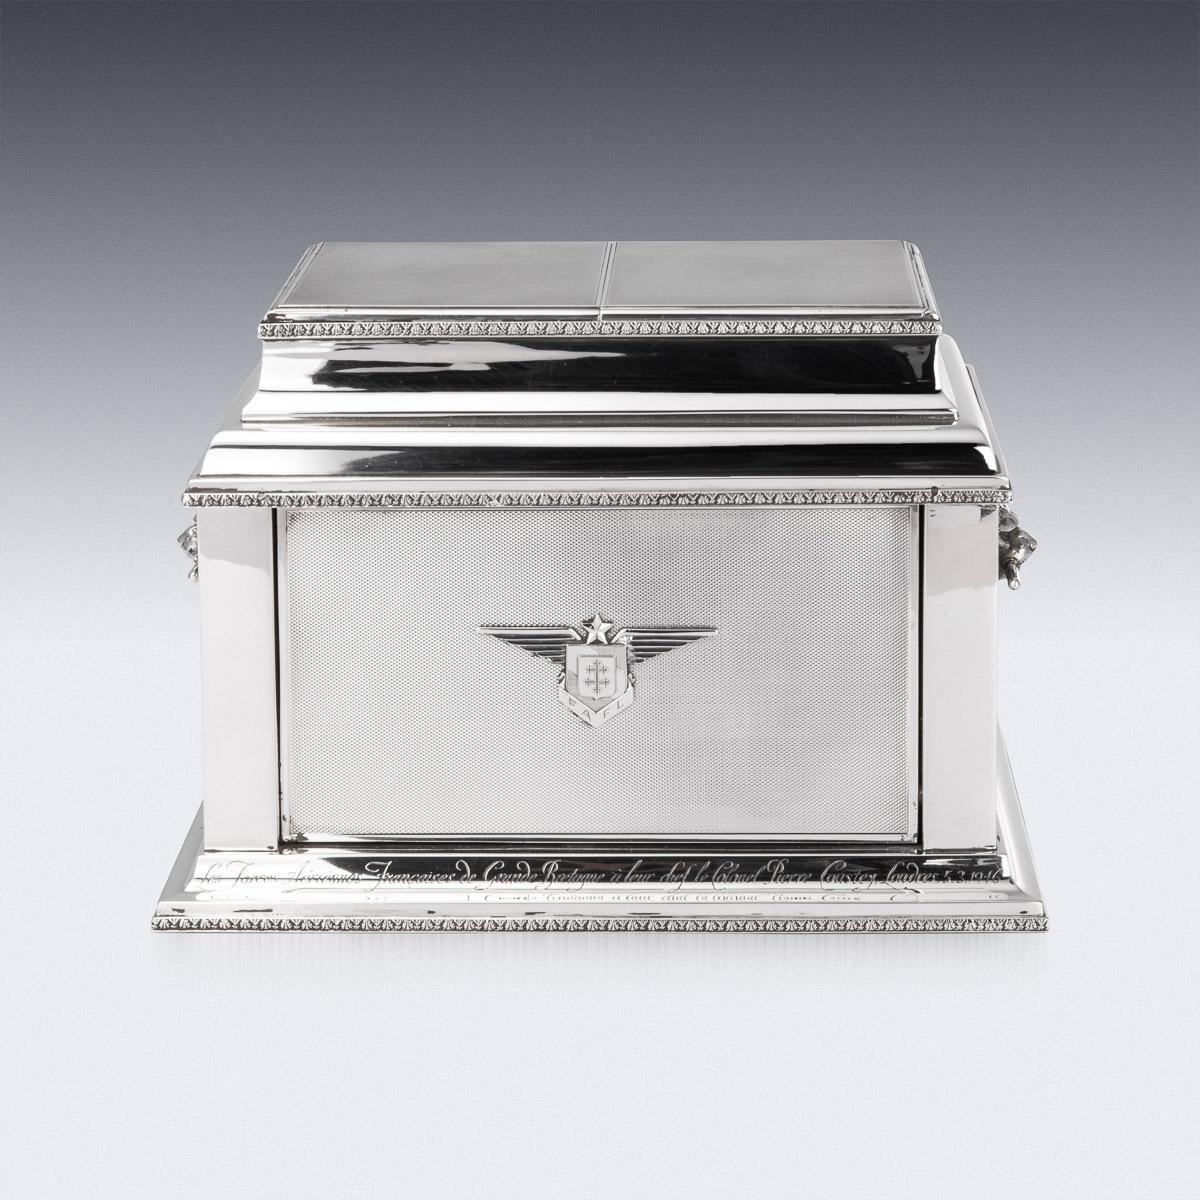 Superb early-20th Century Art Deco solid silver stylish mechanised cigar and cigarette humidor box, sarcophagus-shaped, engine turned and applied with a fine acanthus leaf boarders, sides mounted with realistically modelled lion masks with bars in